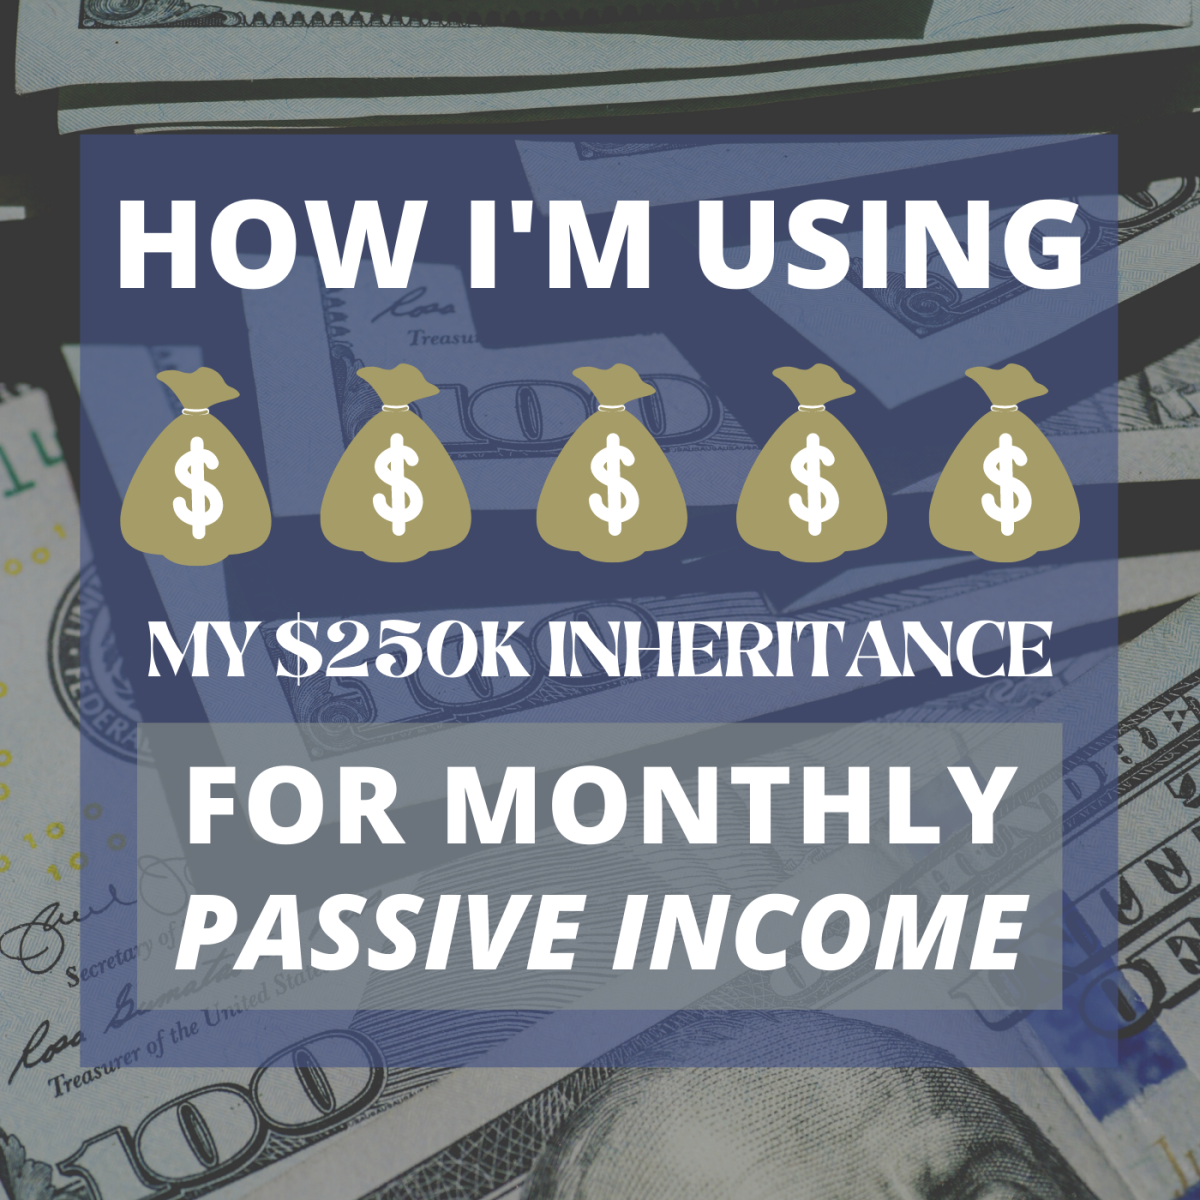 How I'm Using My 250K Inheritance for Passive Income